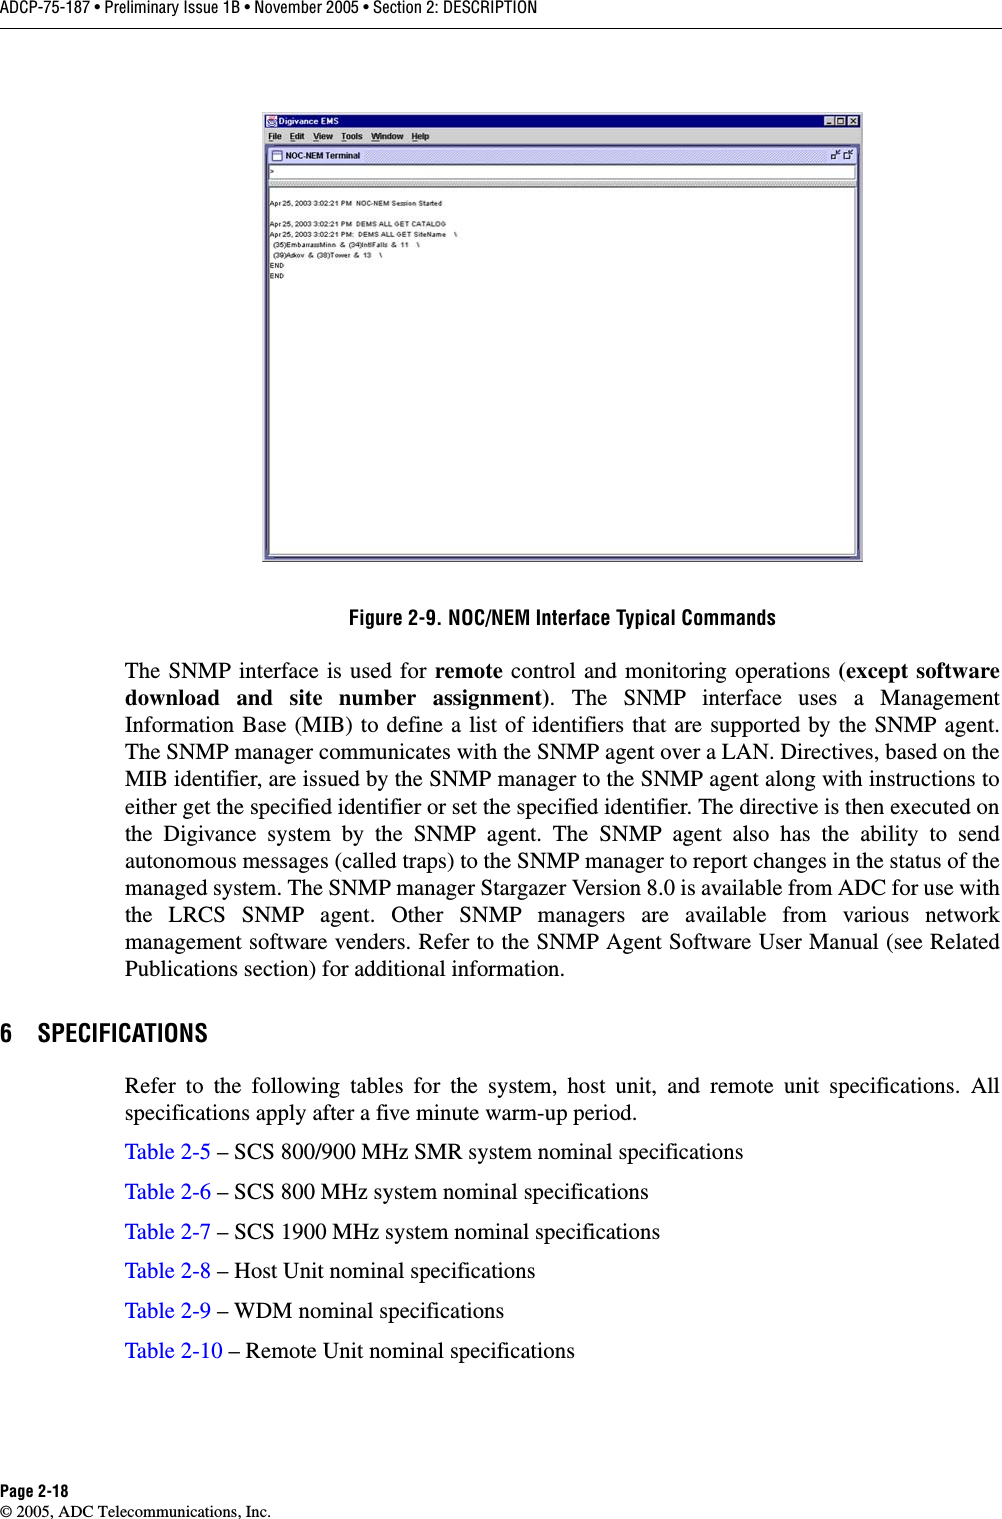 ADCP-75-187 • Preliminary Issue 1B • November 2005 • Section 2: DESCRIPTIONPage 2-18© 2005, ADC Telecommunications, Inc.Figure 2-9. NOC/NEM Interface Typical CommandsThe SNMP interface is used for remote control and monitoring operations (except softwaredownload and site number assignment). The SNMP interface uses a ManagementInformation Base (MIB) to define a list of identifiers that are supported by the SNMP agent.The SNMP manager communicates with the SNMP agent over a LAN. Directives, based on theMIB identifier, are issued by the SNMP manager to the SNMP agent along with instructions toeither get the specified identifier or set the specified identifier. The directive is then executed onthe Digivance system by the SNMP agent. The SNMP agent also has the ability to sendautonomous messages (called traps) to the SNMP manager to report changes in the status of themanaged system. The SNMP manager Stargazer Version 8.0 is available from ADC for use withthe LRCS SNMP agent. Other SNMP managers are available from various networkmanagement software venders. Refer to the SNMP Agent Software User Manual (see RelatedPublications section) for additional information. 6 SPECIFICATIONSRefer to the following tables for the system, host unit, and remote unit specifications. Allspecifications apply after a five minute warm-up period. Table 2-5 – SCS 800/900 MHz SMR system nominal specificationsTable 2-6 – SCS 800 MHz system nominal specificationsTable 2-7 – SCS 1900 MHz system nominal specificationsTable 2-8 – Host Unit nominal specificationsTable 2-9 – WDM nominal specificationsTable 2-10 – Remote Unit nominal specifications